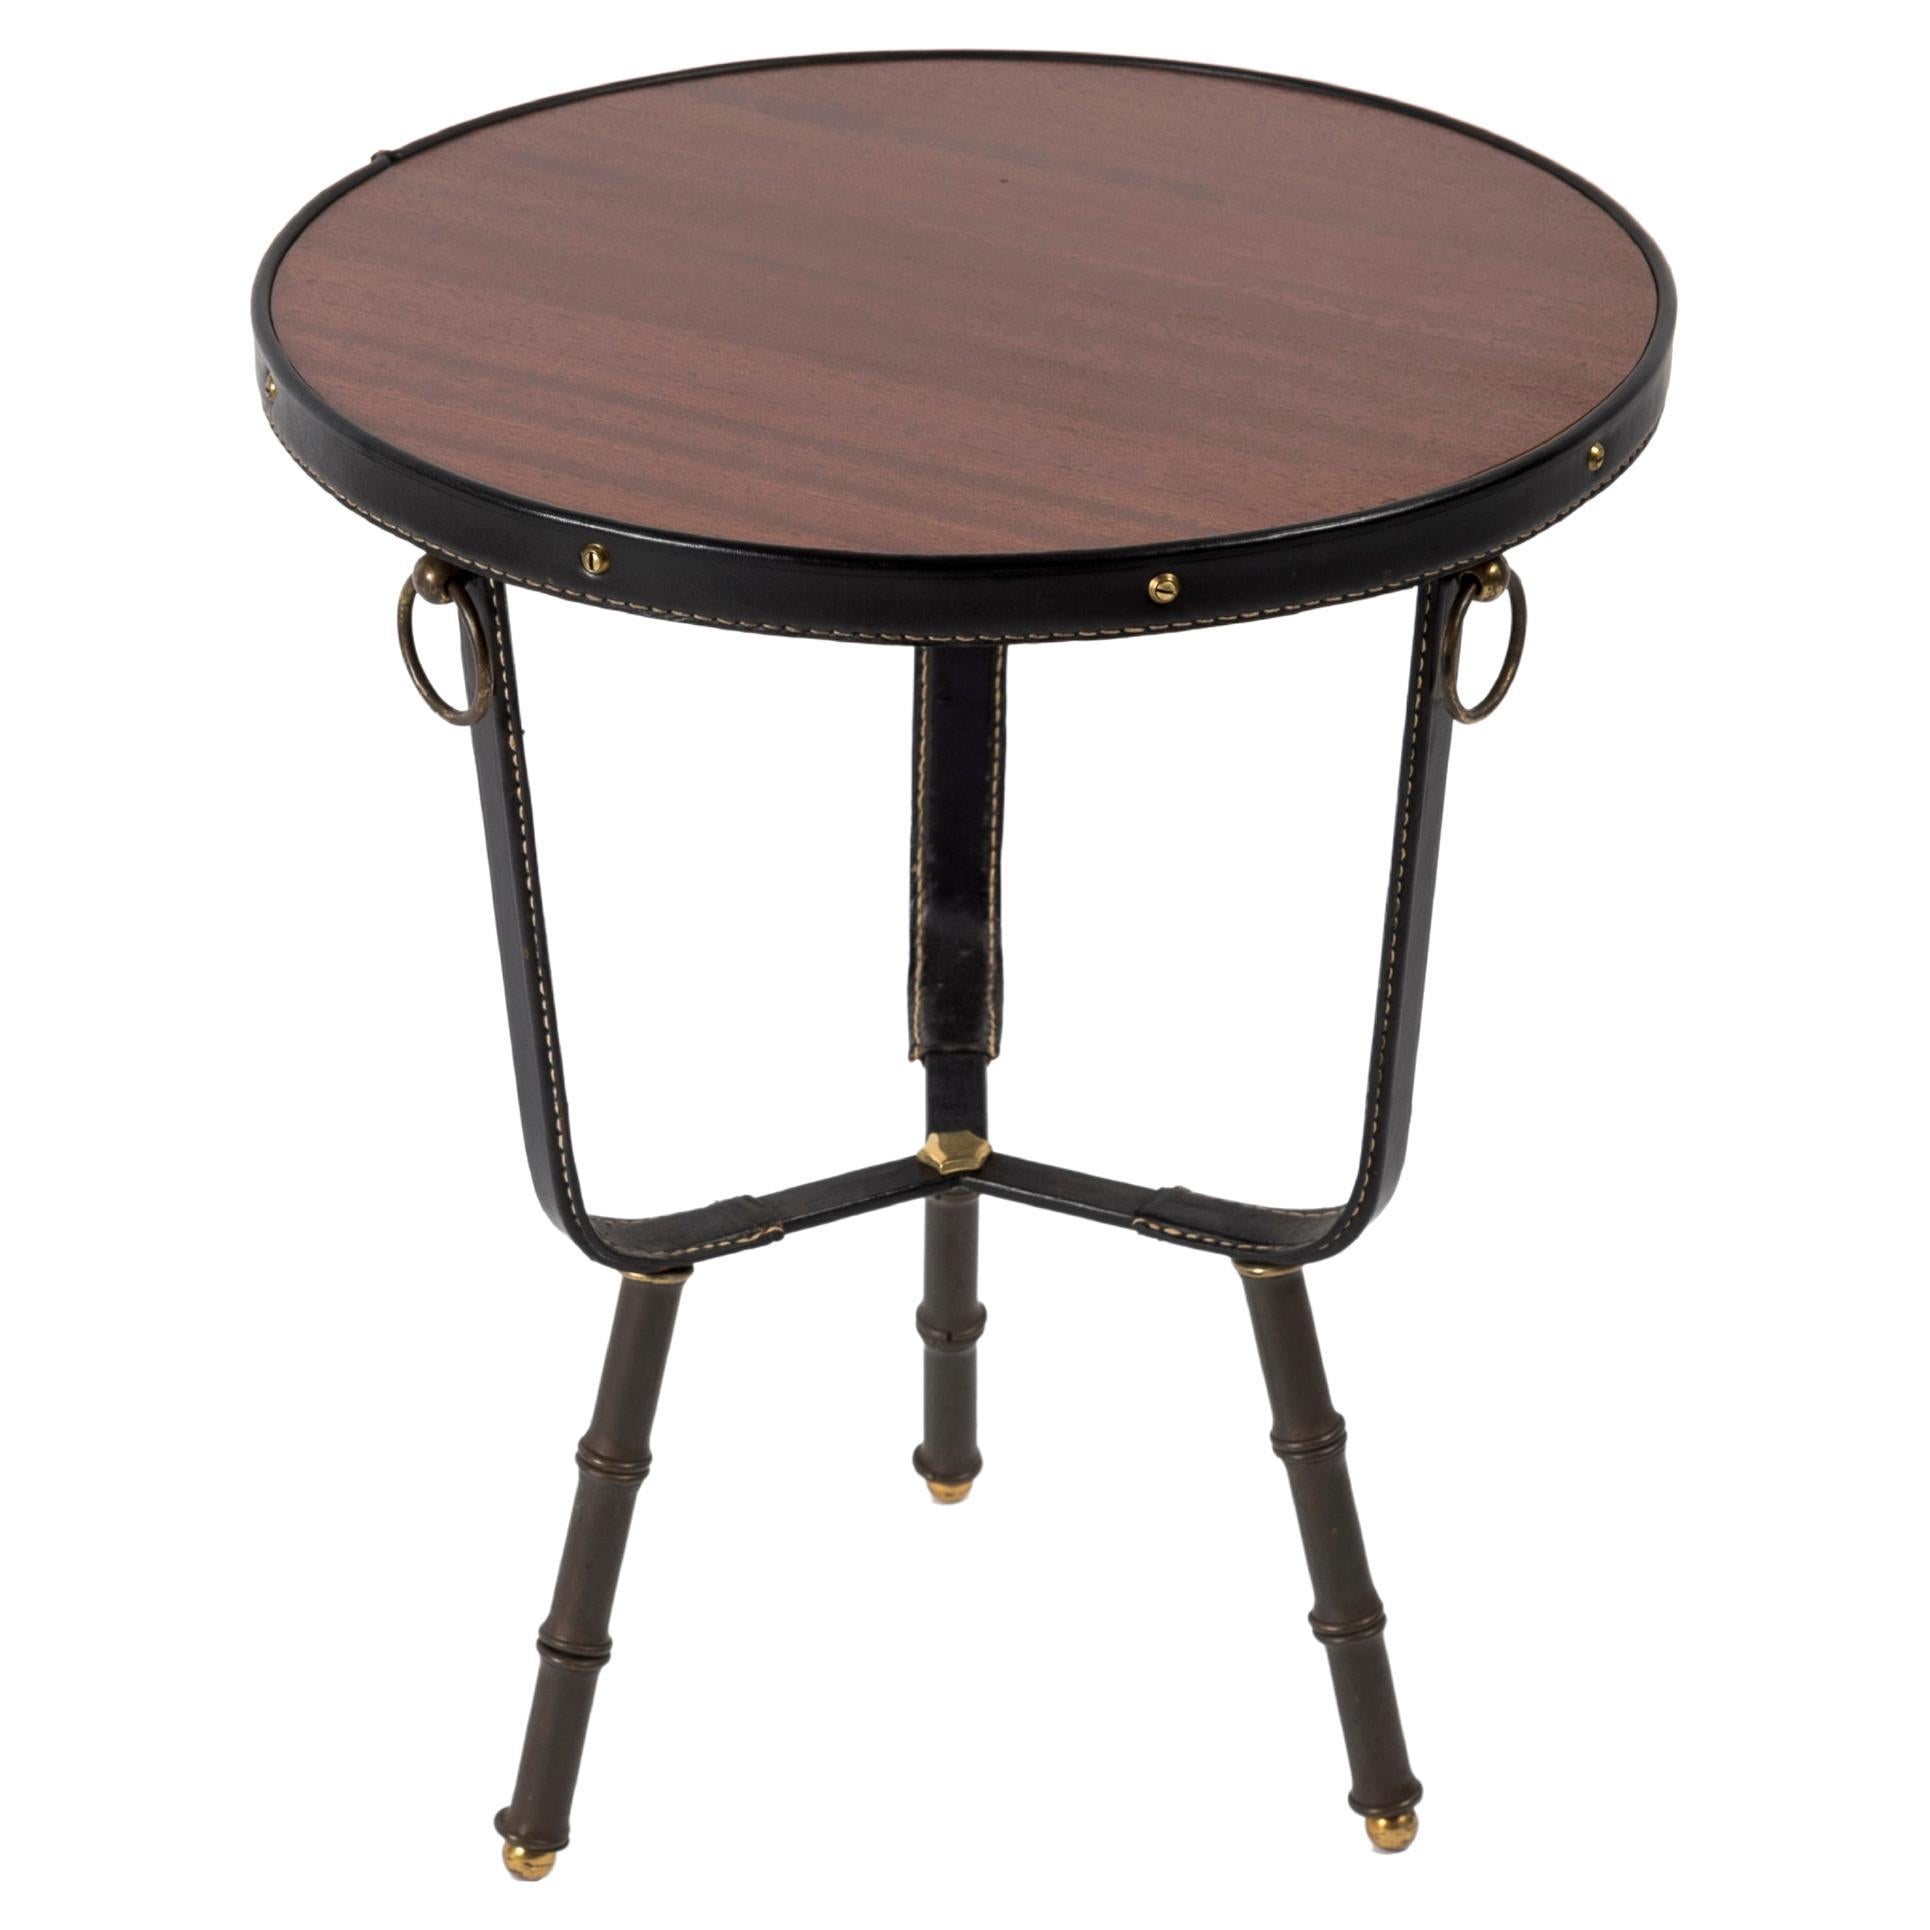 1950's Stitched Leather Side Table by Jacques Adnet